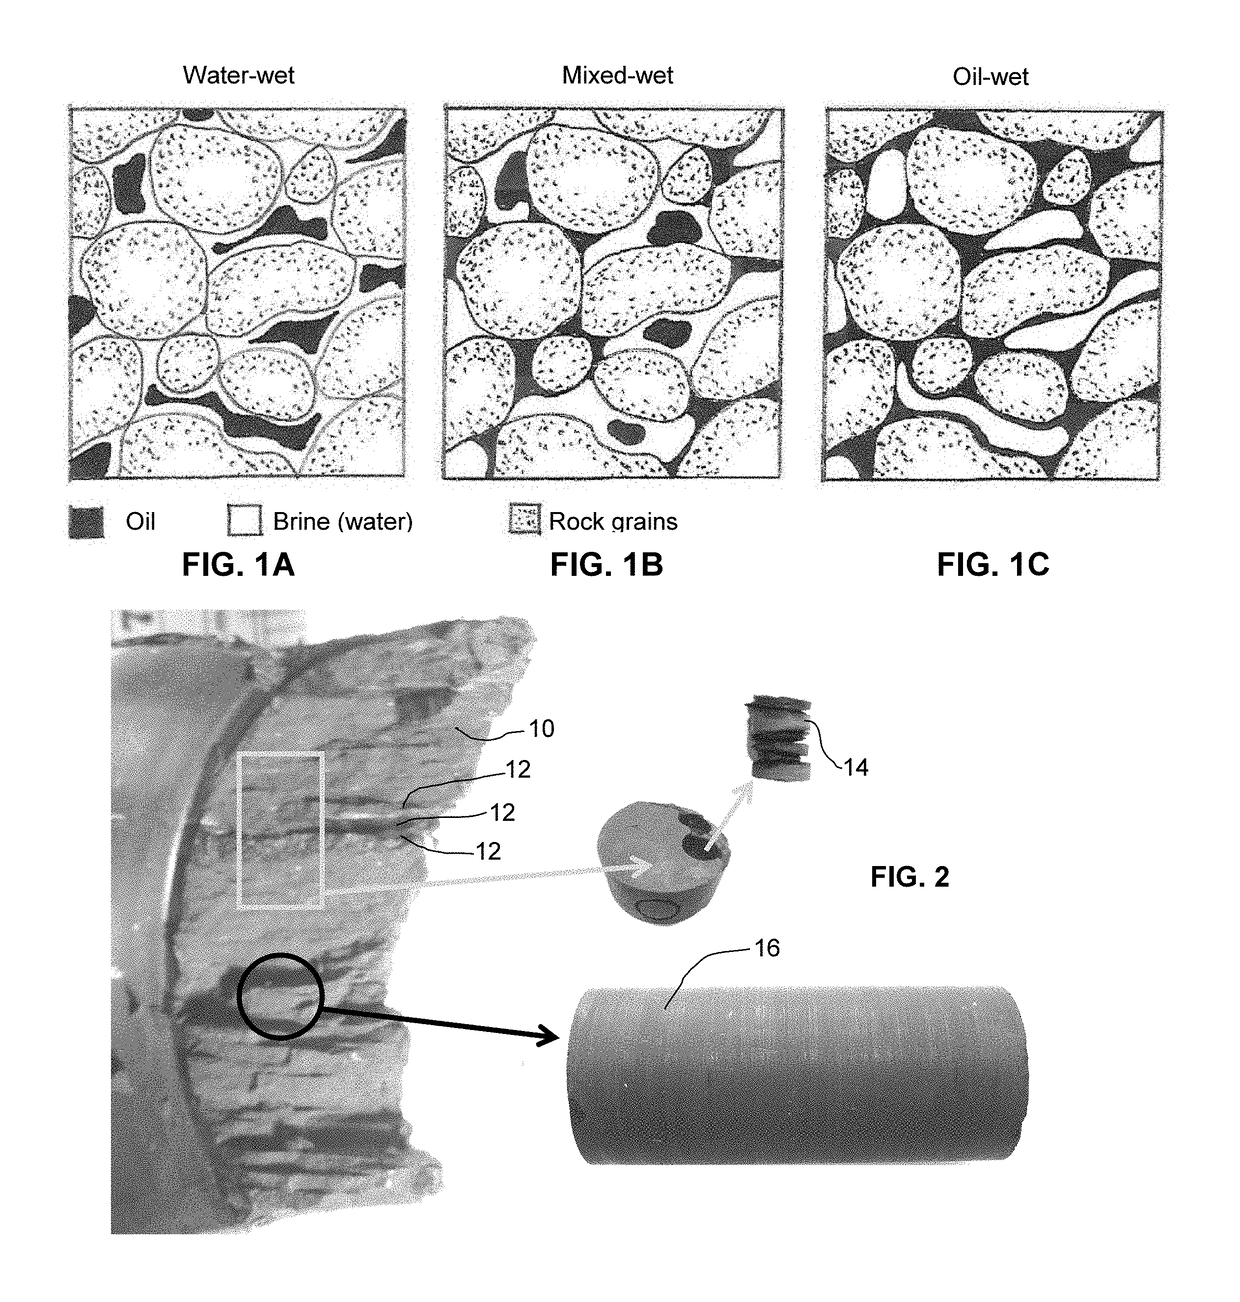 Methods and Materials for Improving Wellbore Stability in Laminated Tight Carbonate Source-Rock Formations